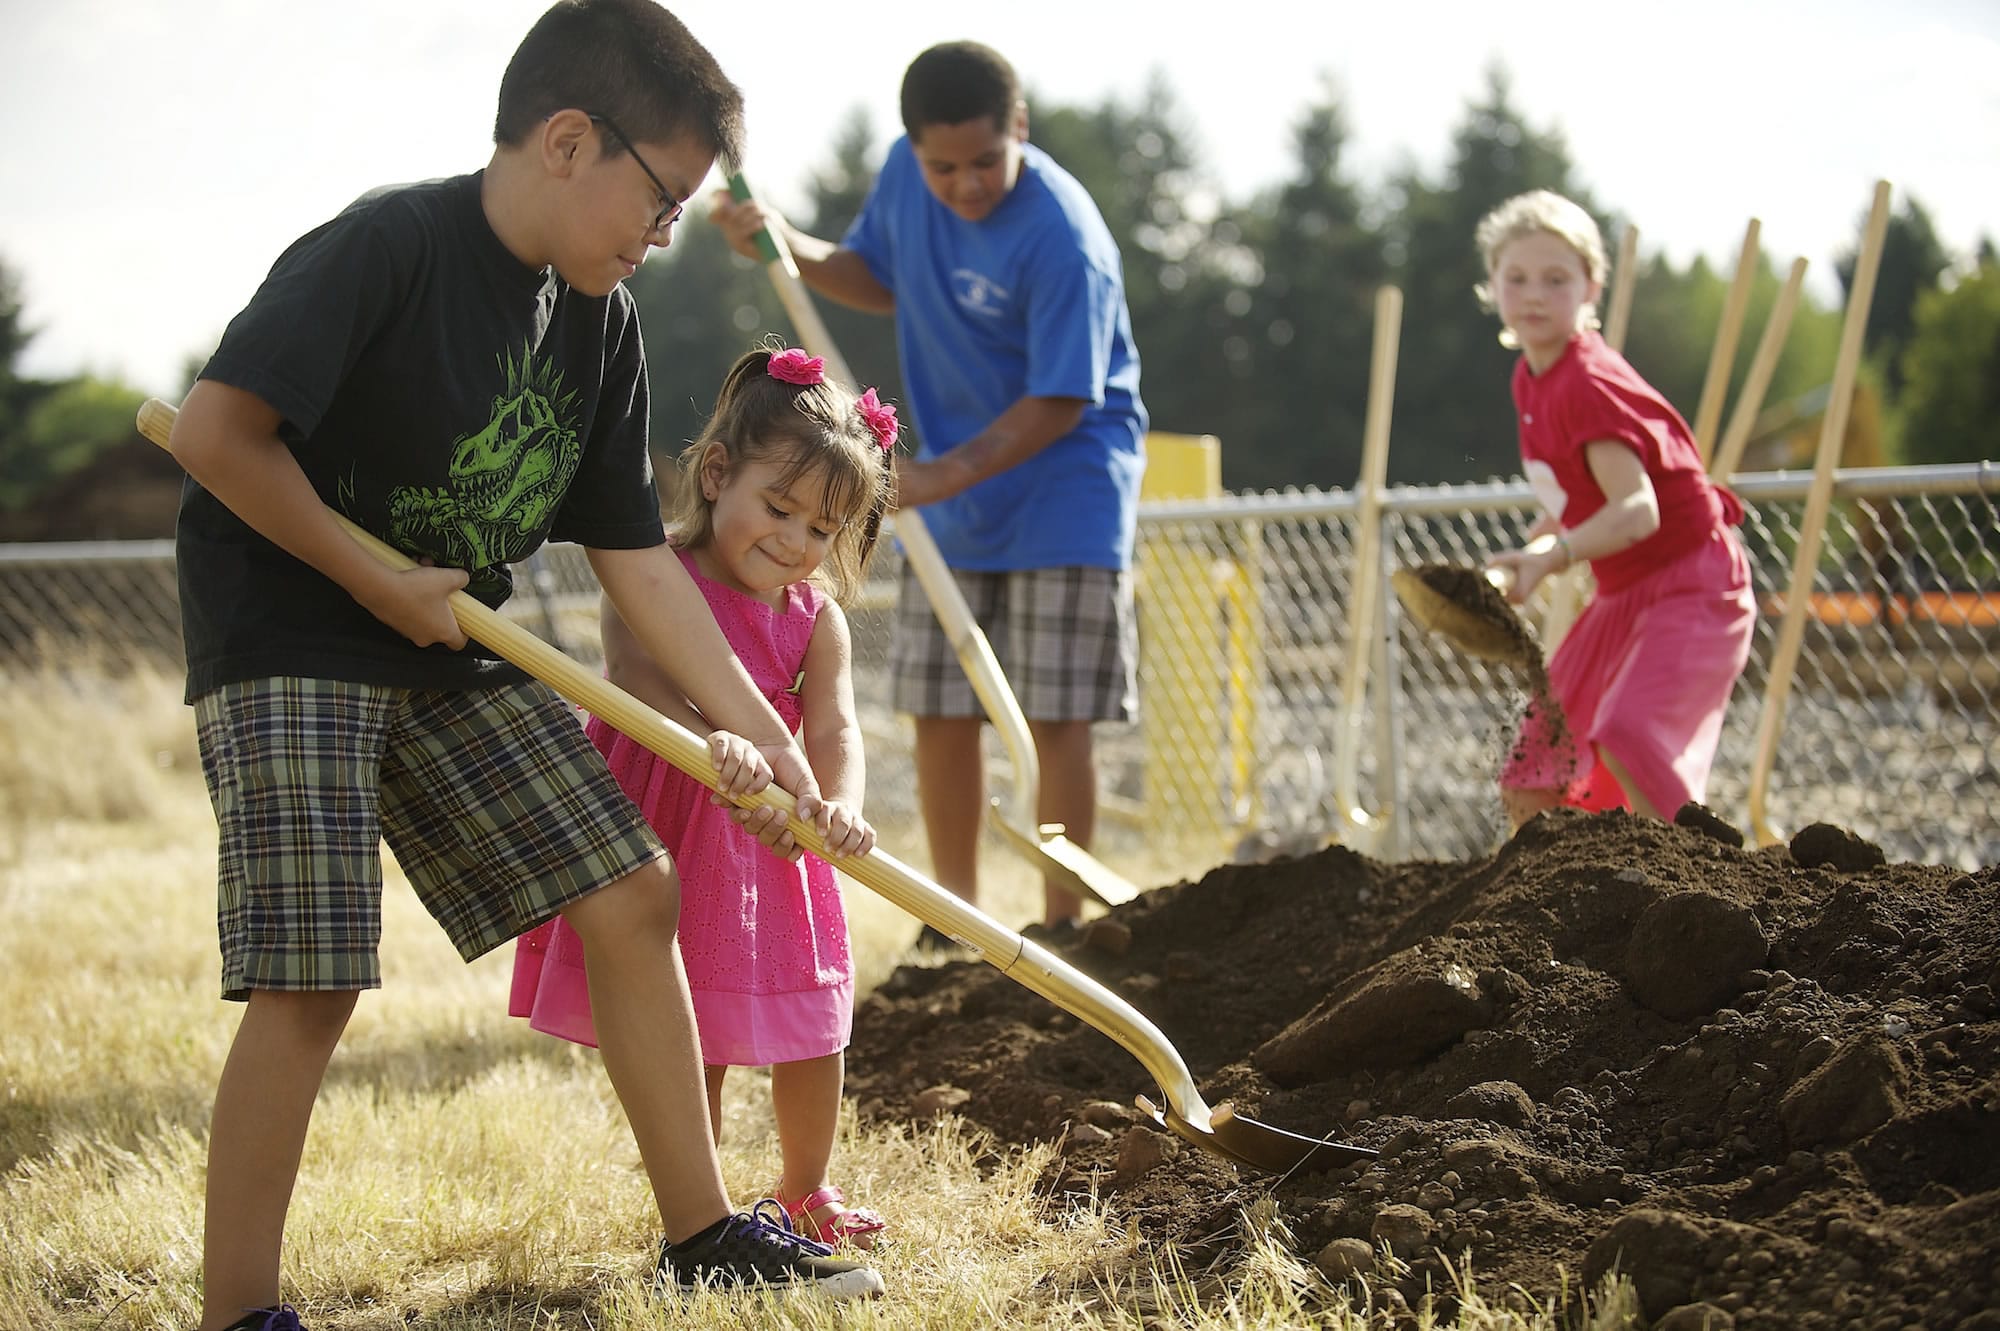 Using a gold shovel, Edvin Elguea, 9, a fourth-grader at Crestline Elementary School, helps his sister, Naobe, 2, shovel ceremonial dirt during the official groundbreaking at the construction site of the new Crestline Elementary School.